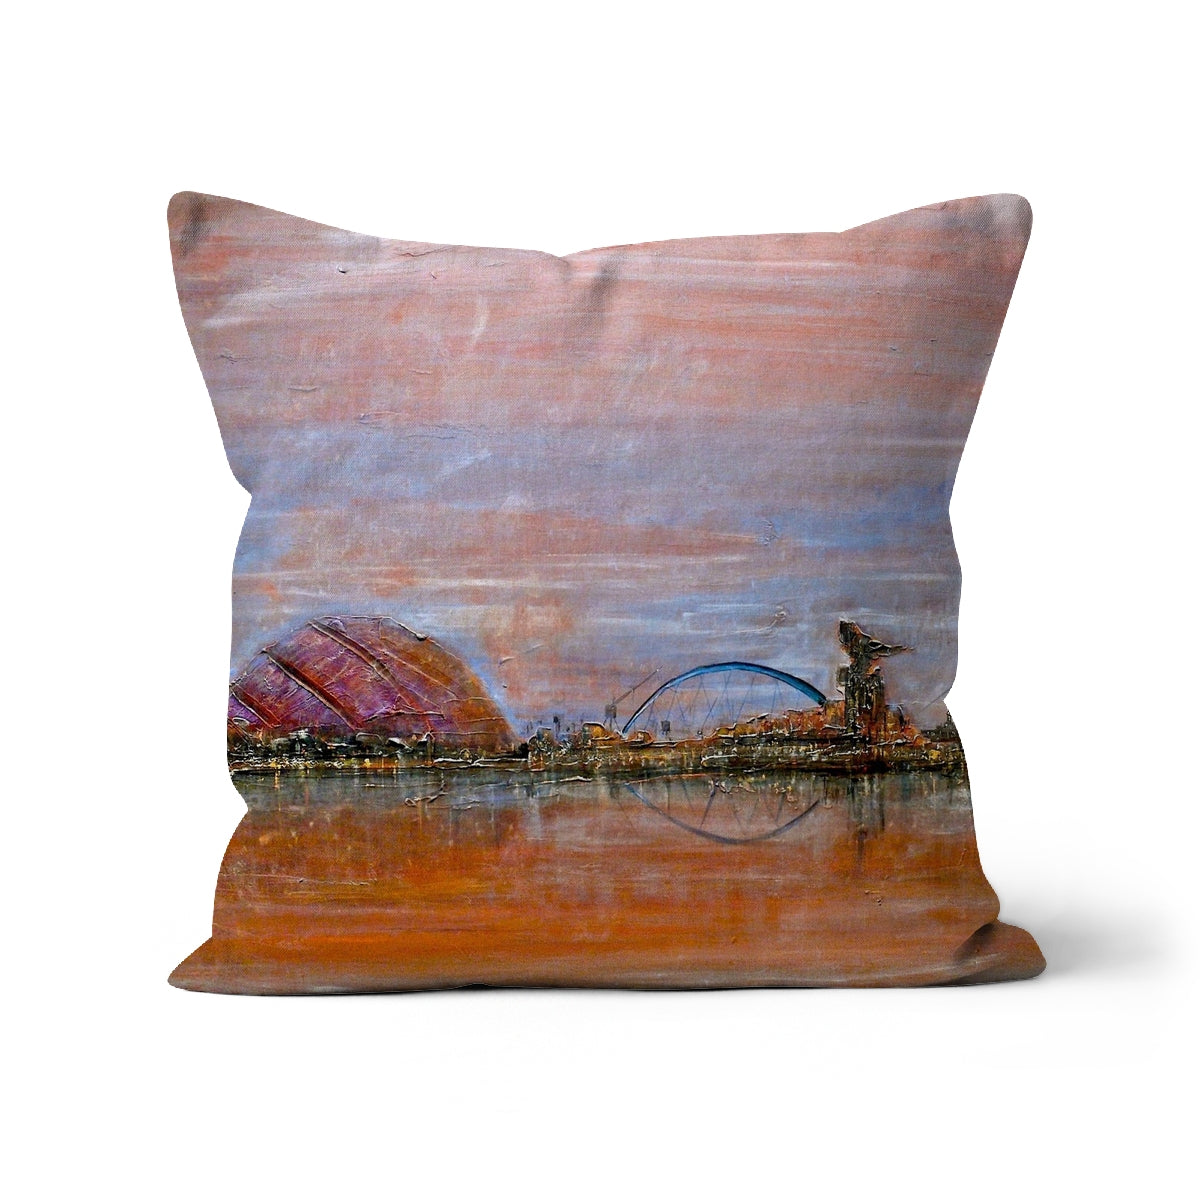 Glasgow Harbour Art Gifts Cushion-Cushions-Edinburgh & Glasgow Art Gallery-Canvas-12"x12"-Paintings, Prints, Homeware, Art Gifts From Scotland By Scottish Artist Kevin Hunter